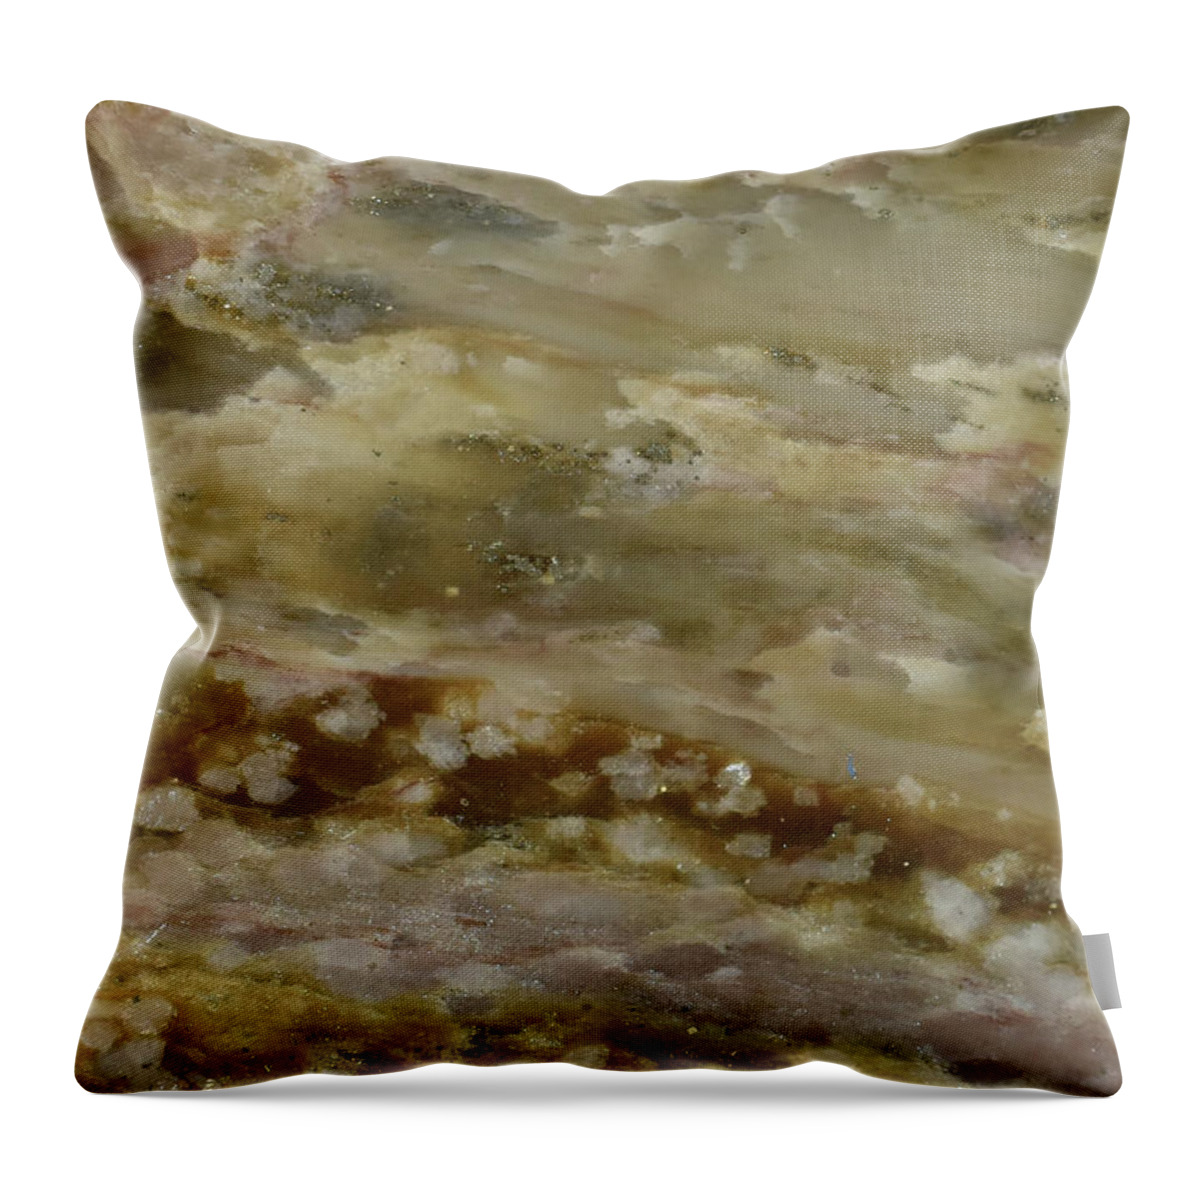 Art In A Rock Throw Pillow featuring the photograph Mr1020d by Art in a Rock